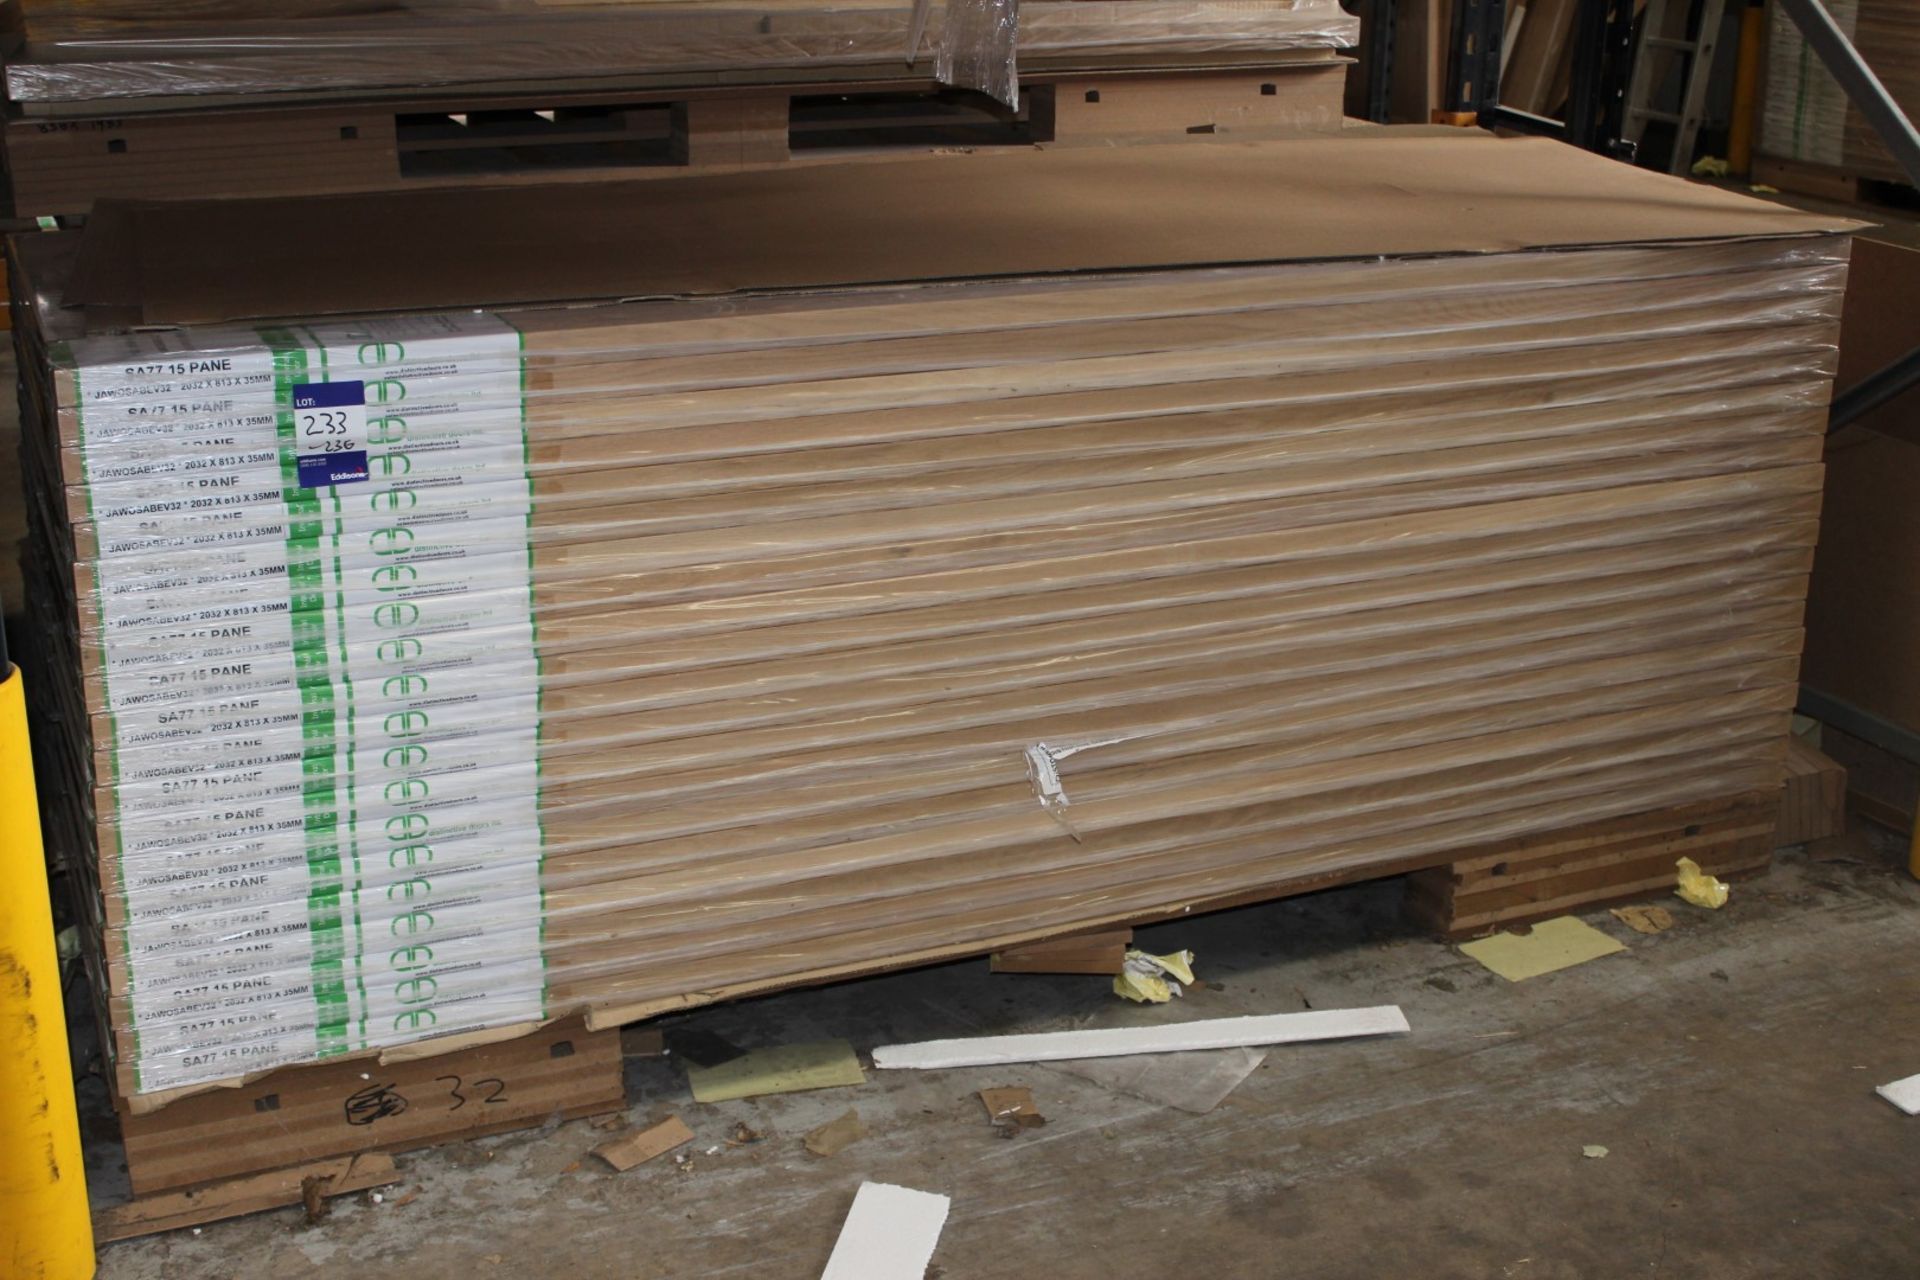 5 x SA77 15 Pane Internal, JAWOSABEB32, 2032mm x 813mm x 35mm - Lots to be handed out in order - Image 2 of 3